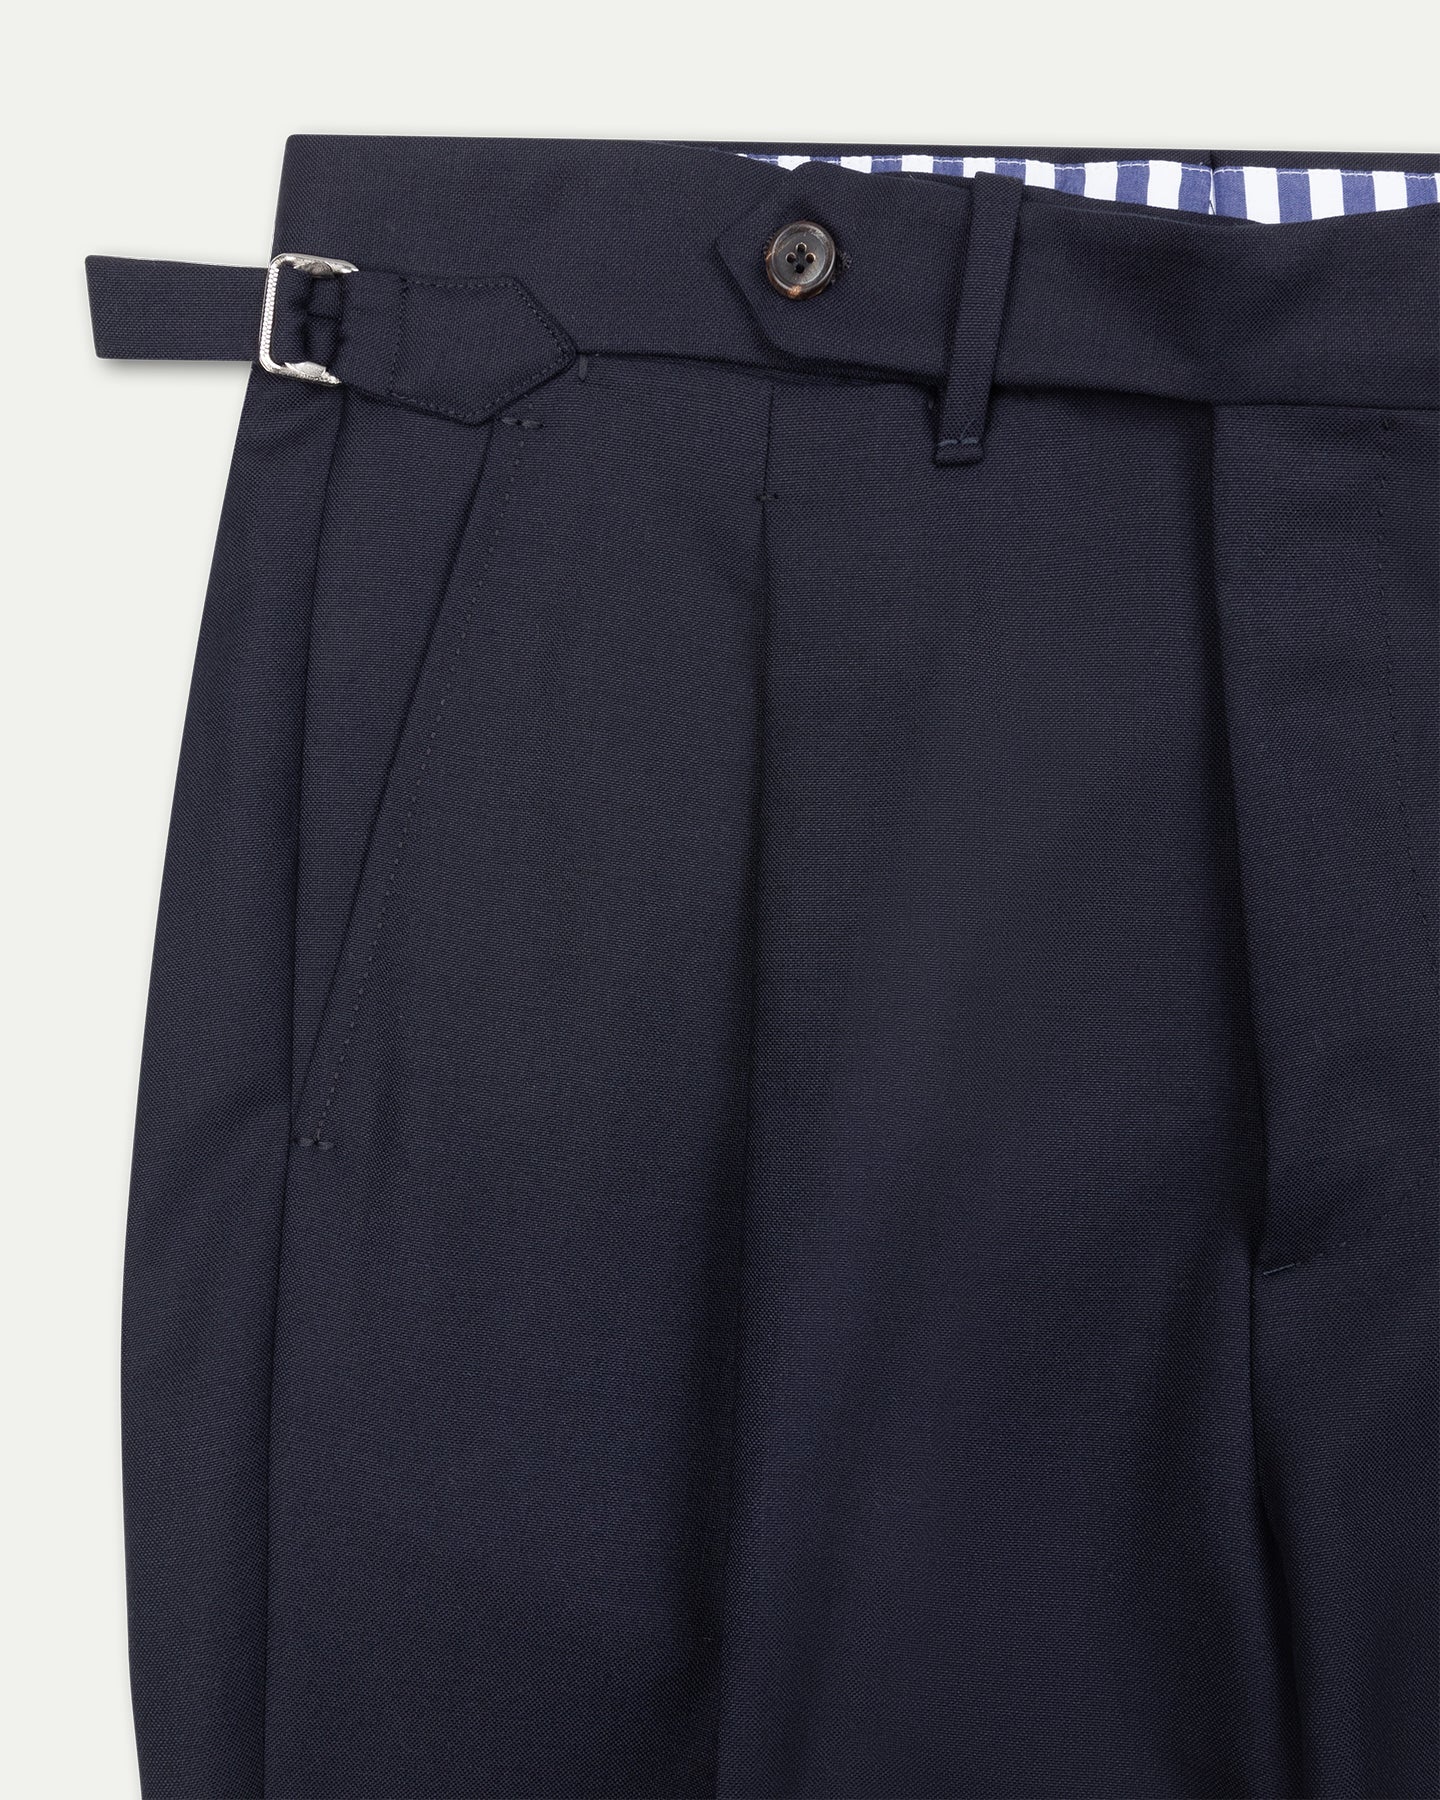 Made-To-Order Navy Hopsack Suit Trousers